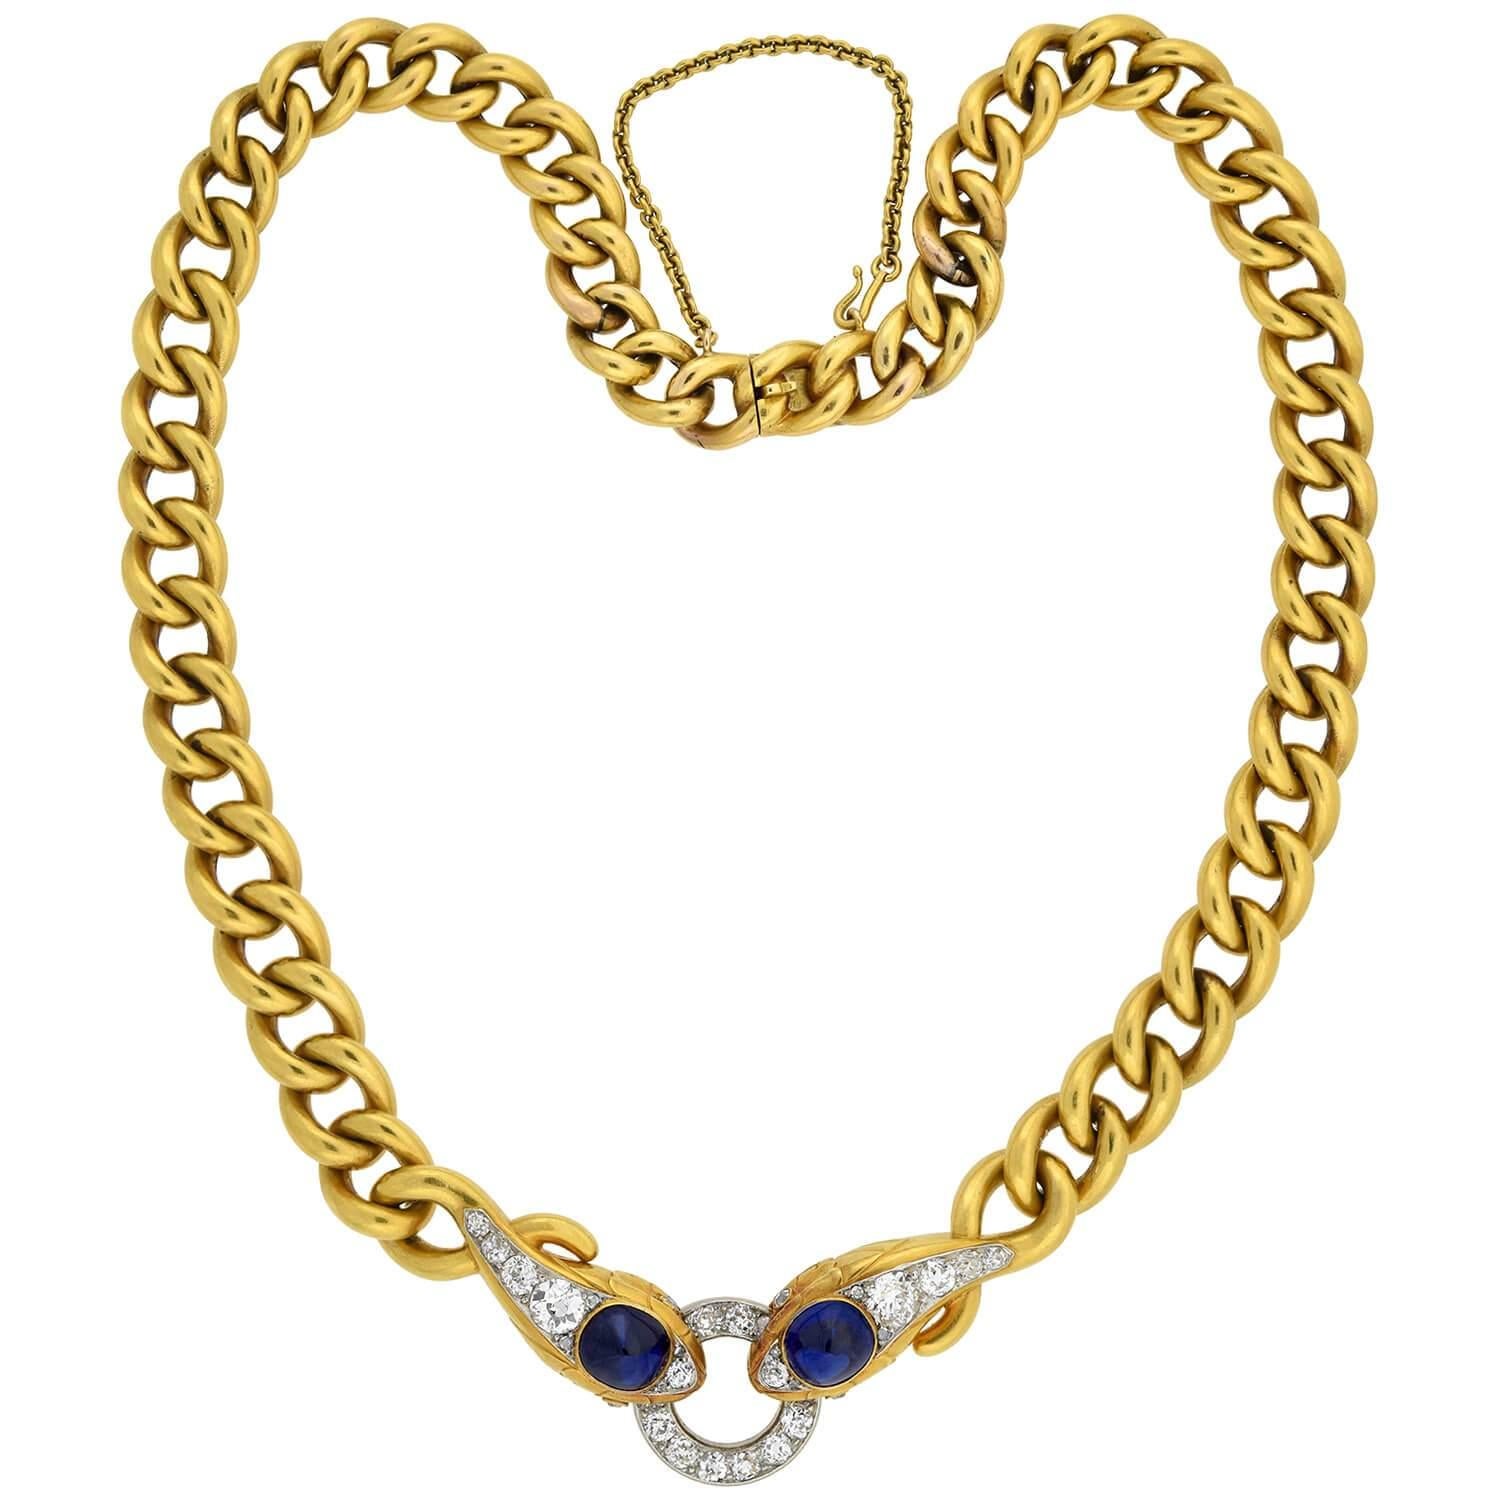 An absolutely spectacular snake necklace from the Edwardian (1910s) era! This exquisite piece is crafted in 18kt yellow gold and platinum and features a double-headed snake motif at the center of a heavy gold chain. The two striking snakes face one